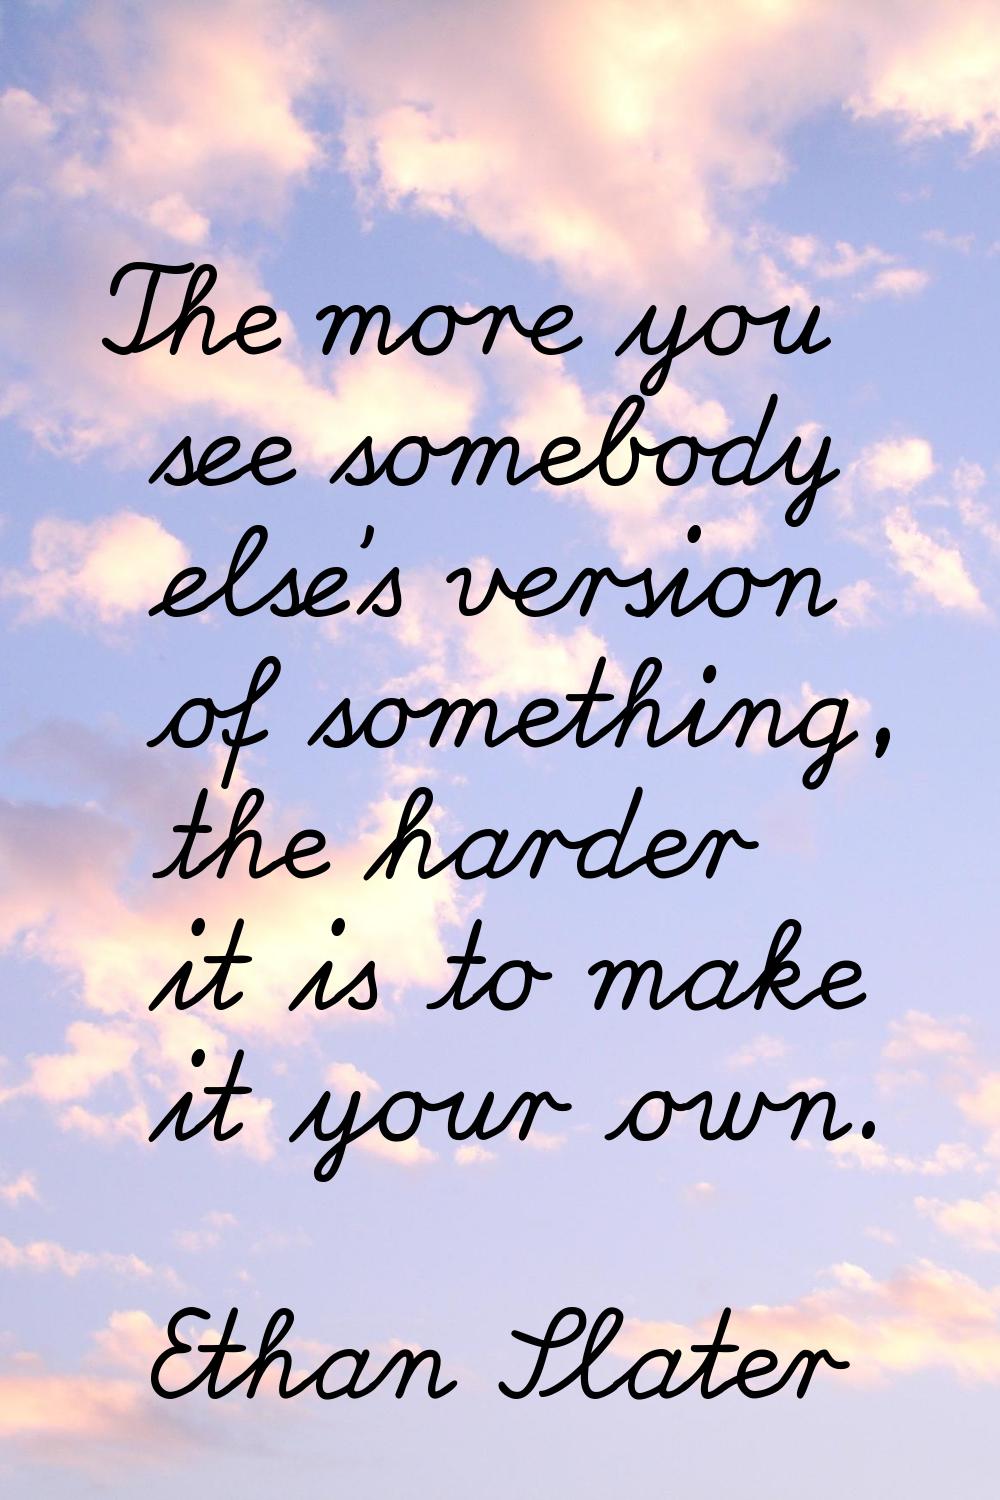 The more you see somebody else's version of something, the harder it is to make it your own.